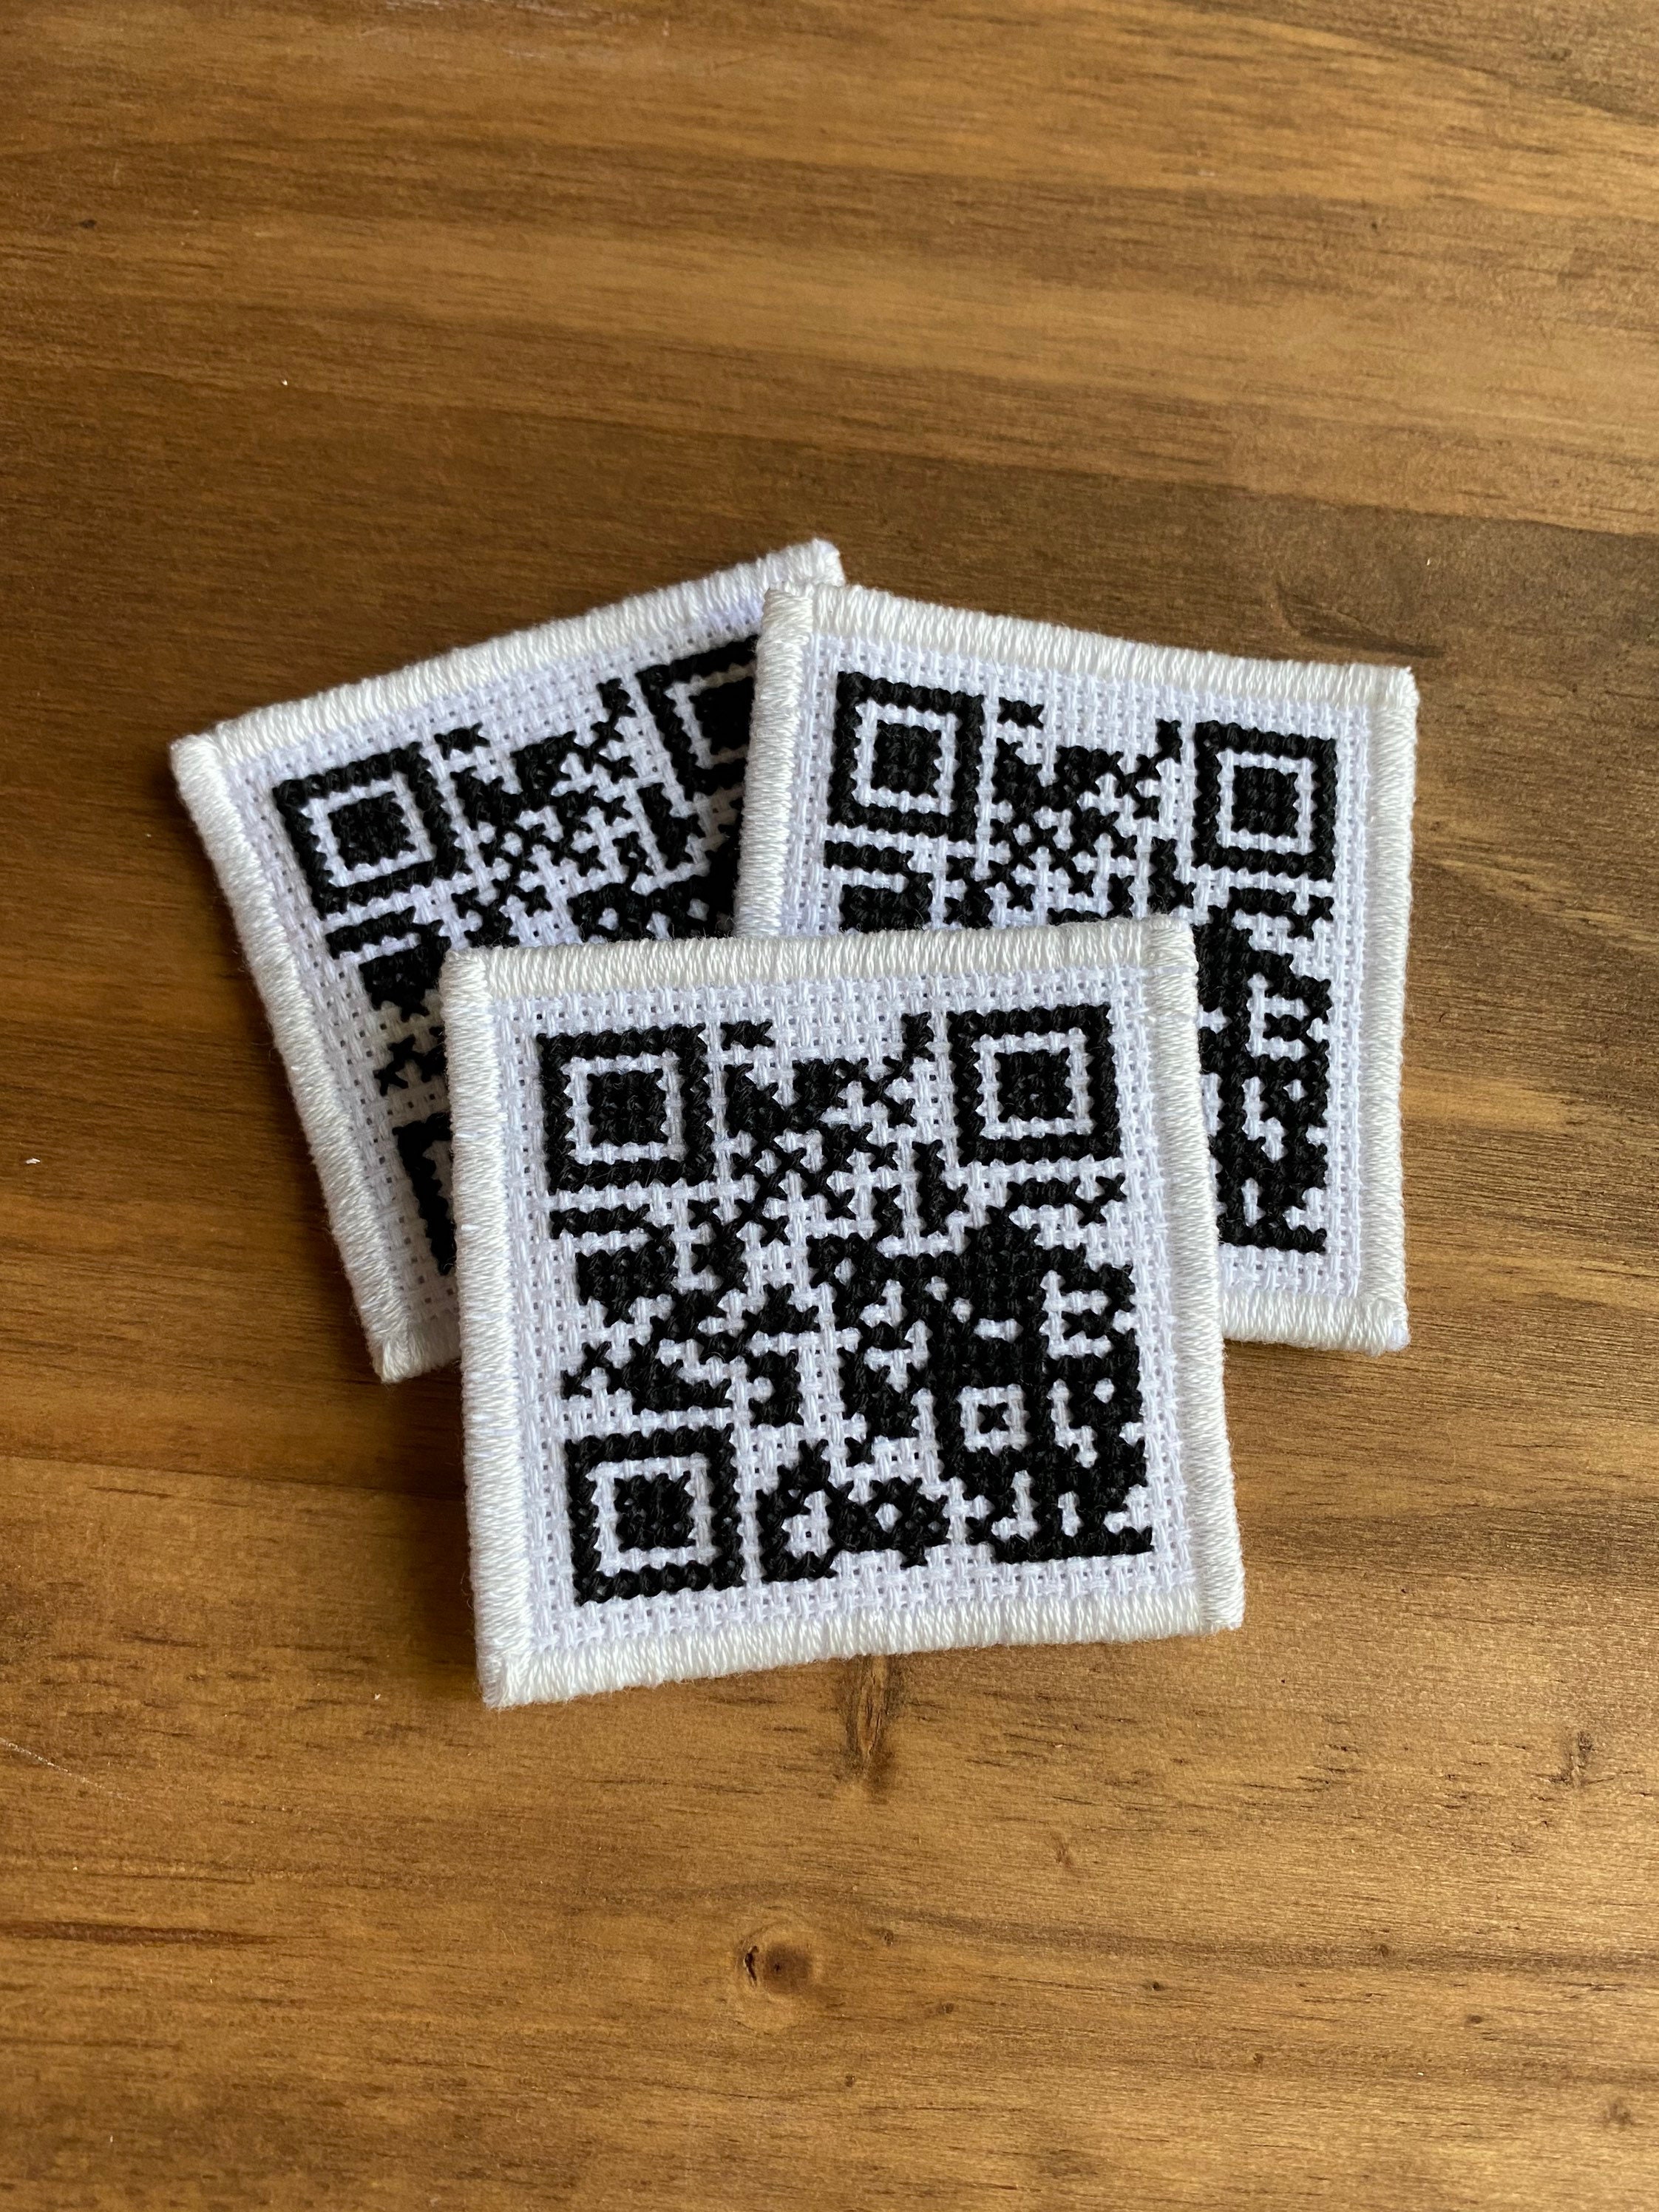 QR Rick Roll Patch Fully Embroidered Never Gonna Give You up 